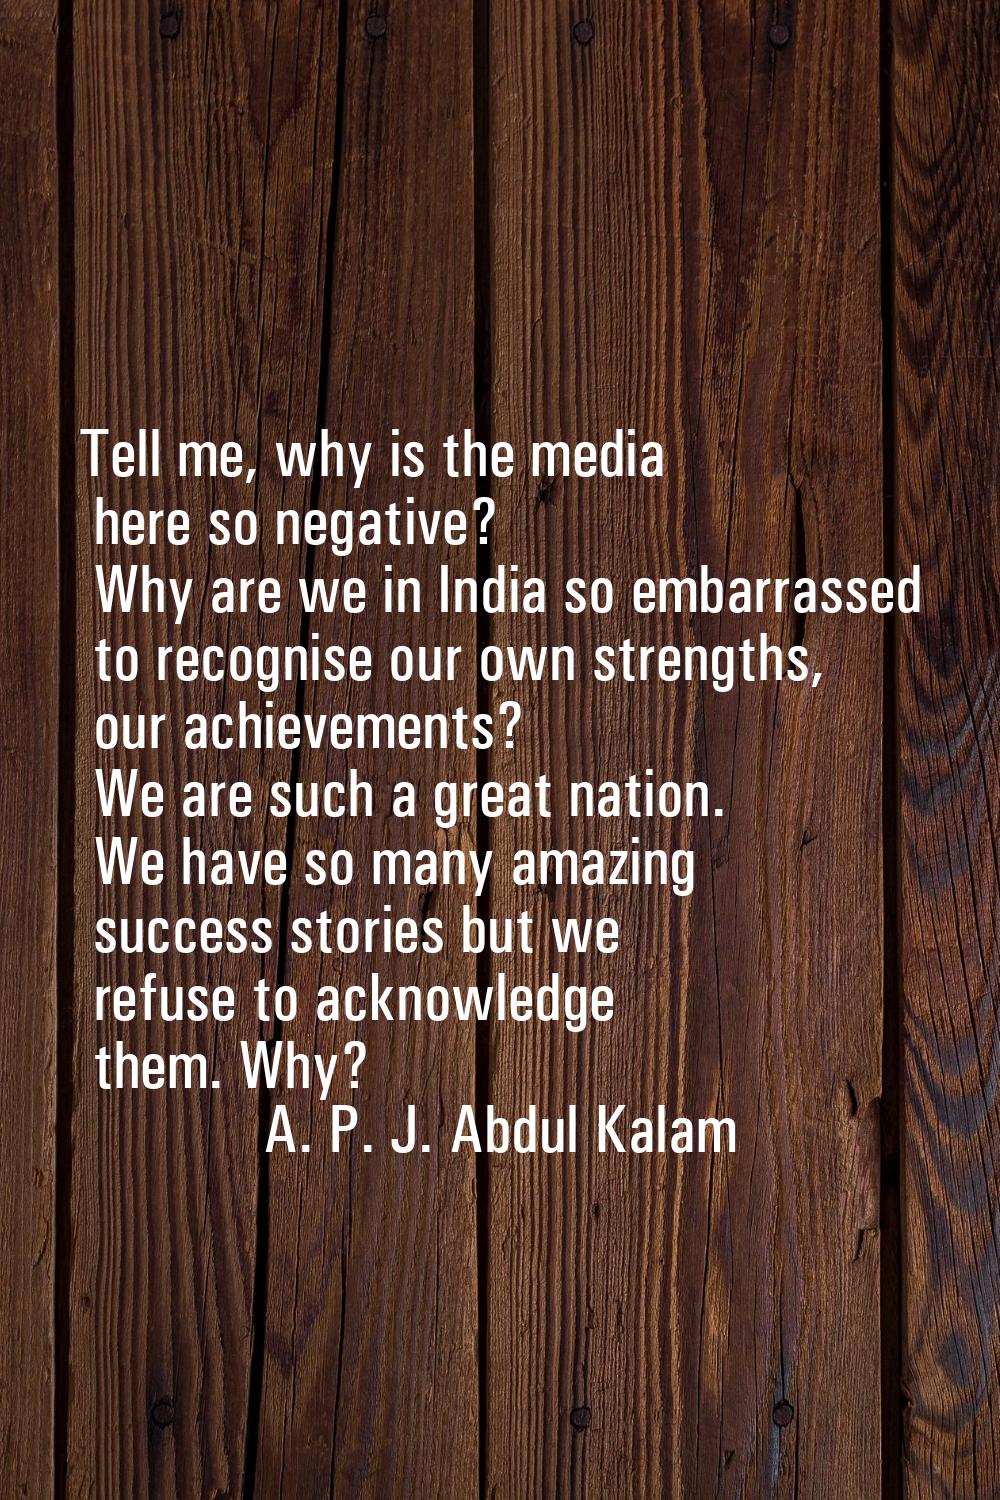 Tell me, why is the media here so negative? Why are we in India so embarrassed to recognise our own